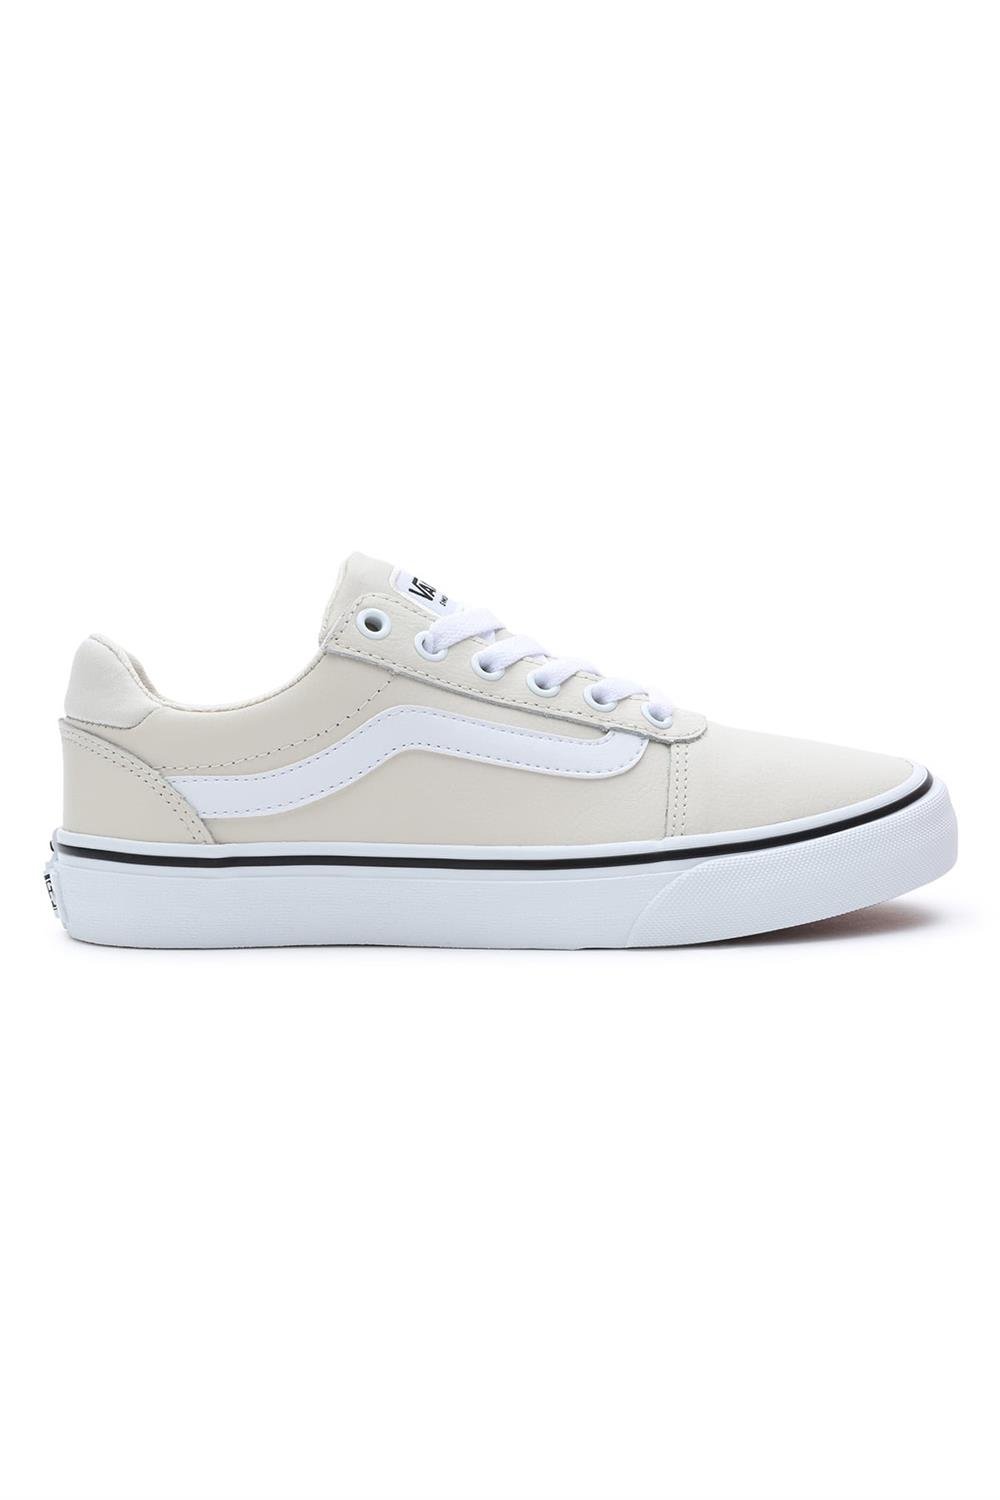 Ward Deluxe Birch Tumble Leather Trainers-Single side view